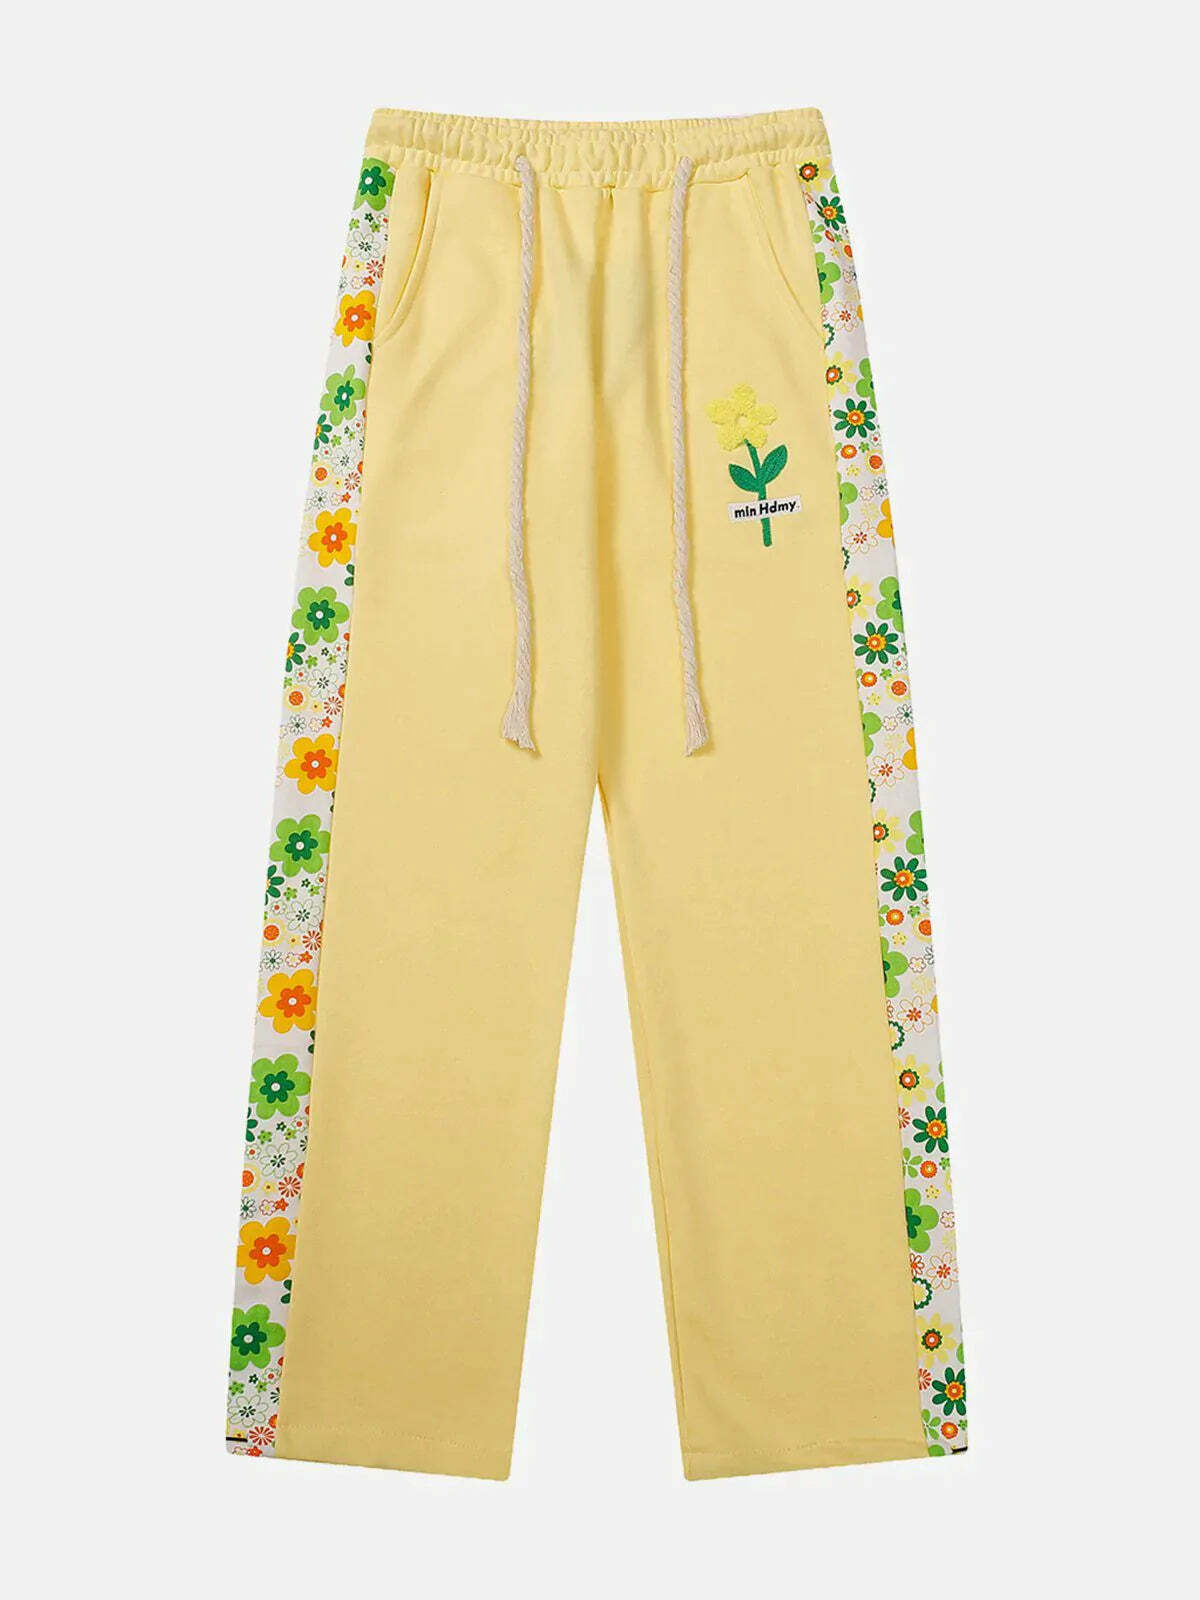 floral side stripe pants casual chic & vibrant 5322